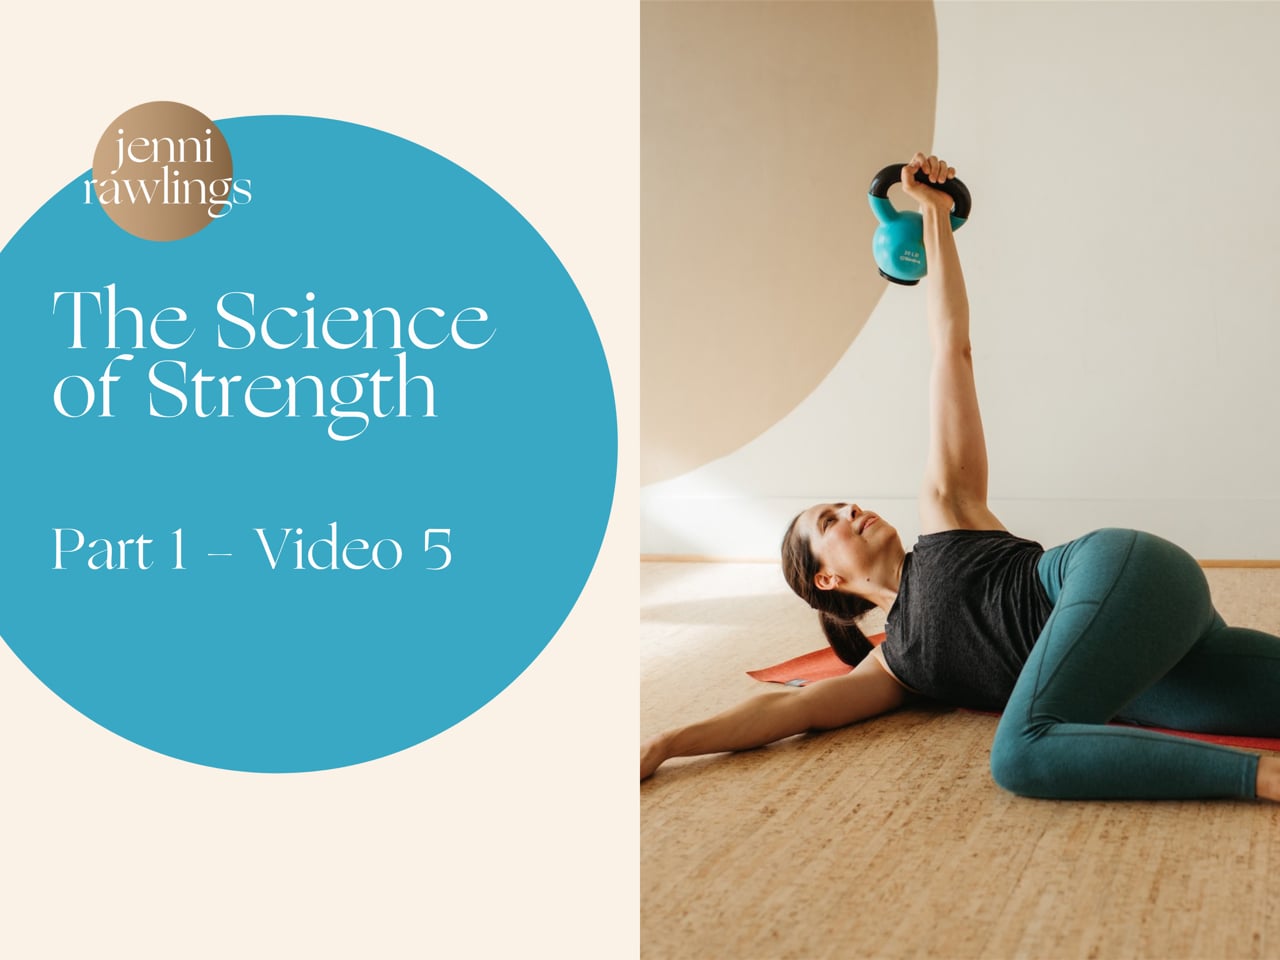 The Science of Strength Part 1, Video 5